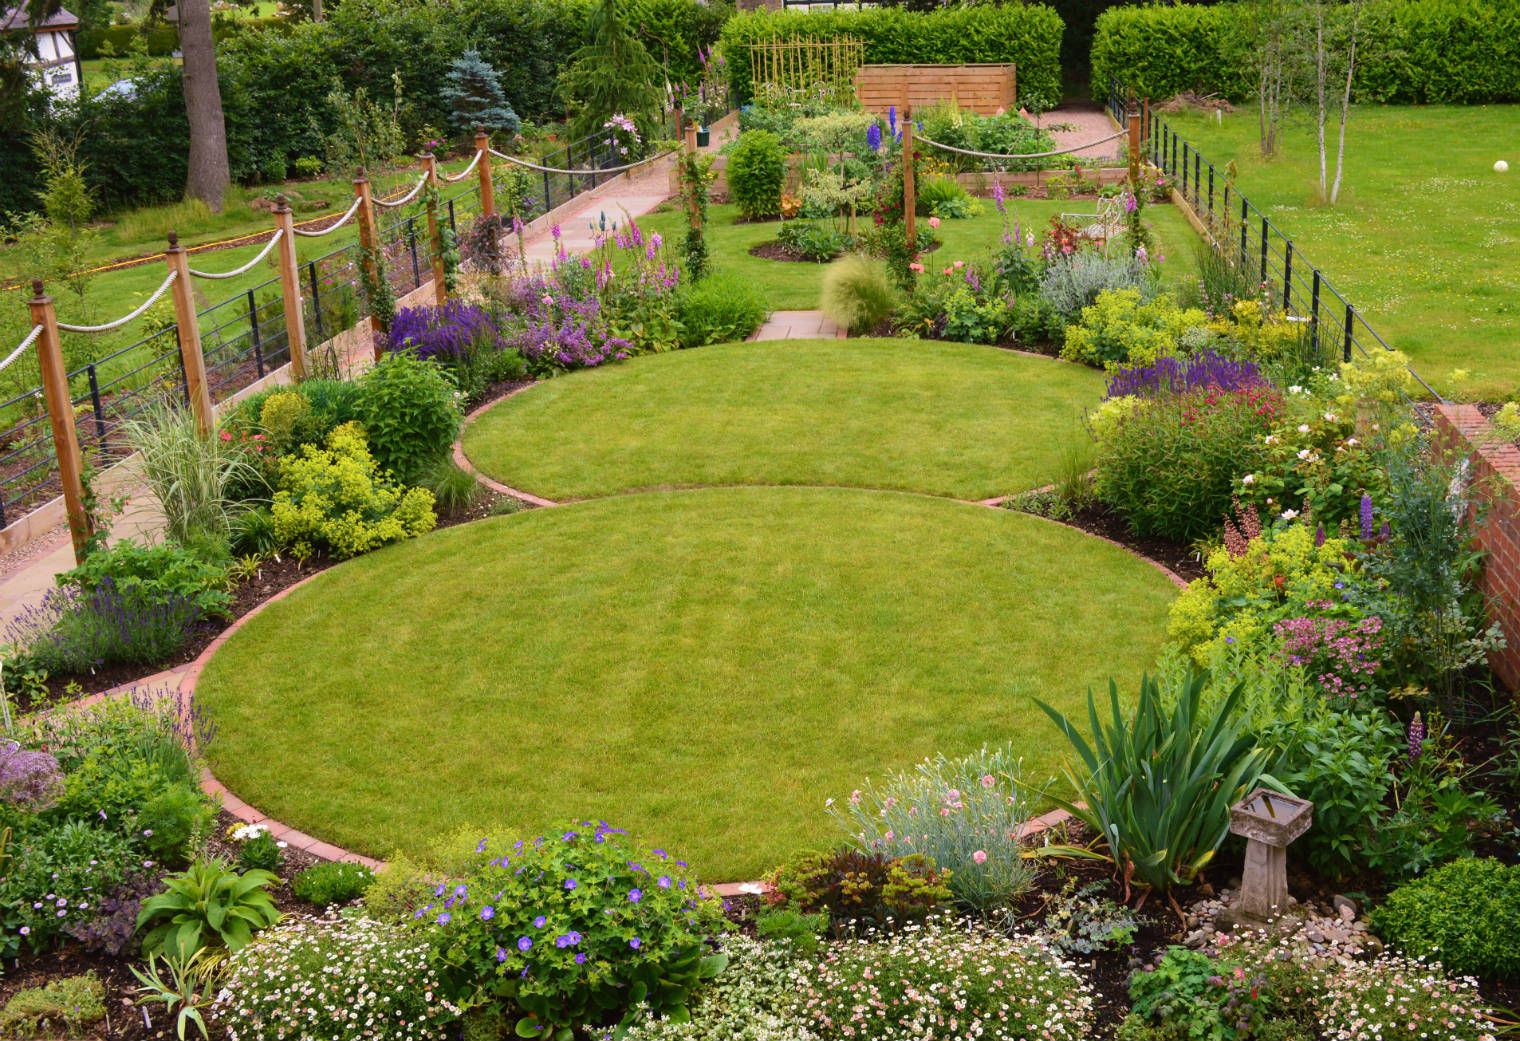 Circular lawns and traditional planting scheme Unique Landscapes Country style gardens circular lawns,traditional planting,timber posts,rope,lawn,country garden,traditional garden